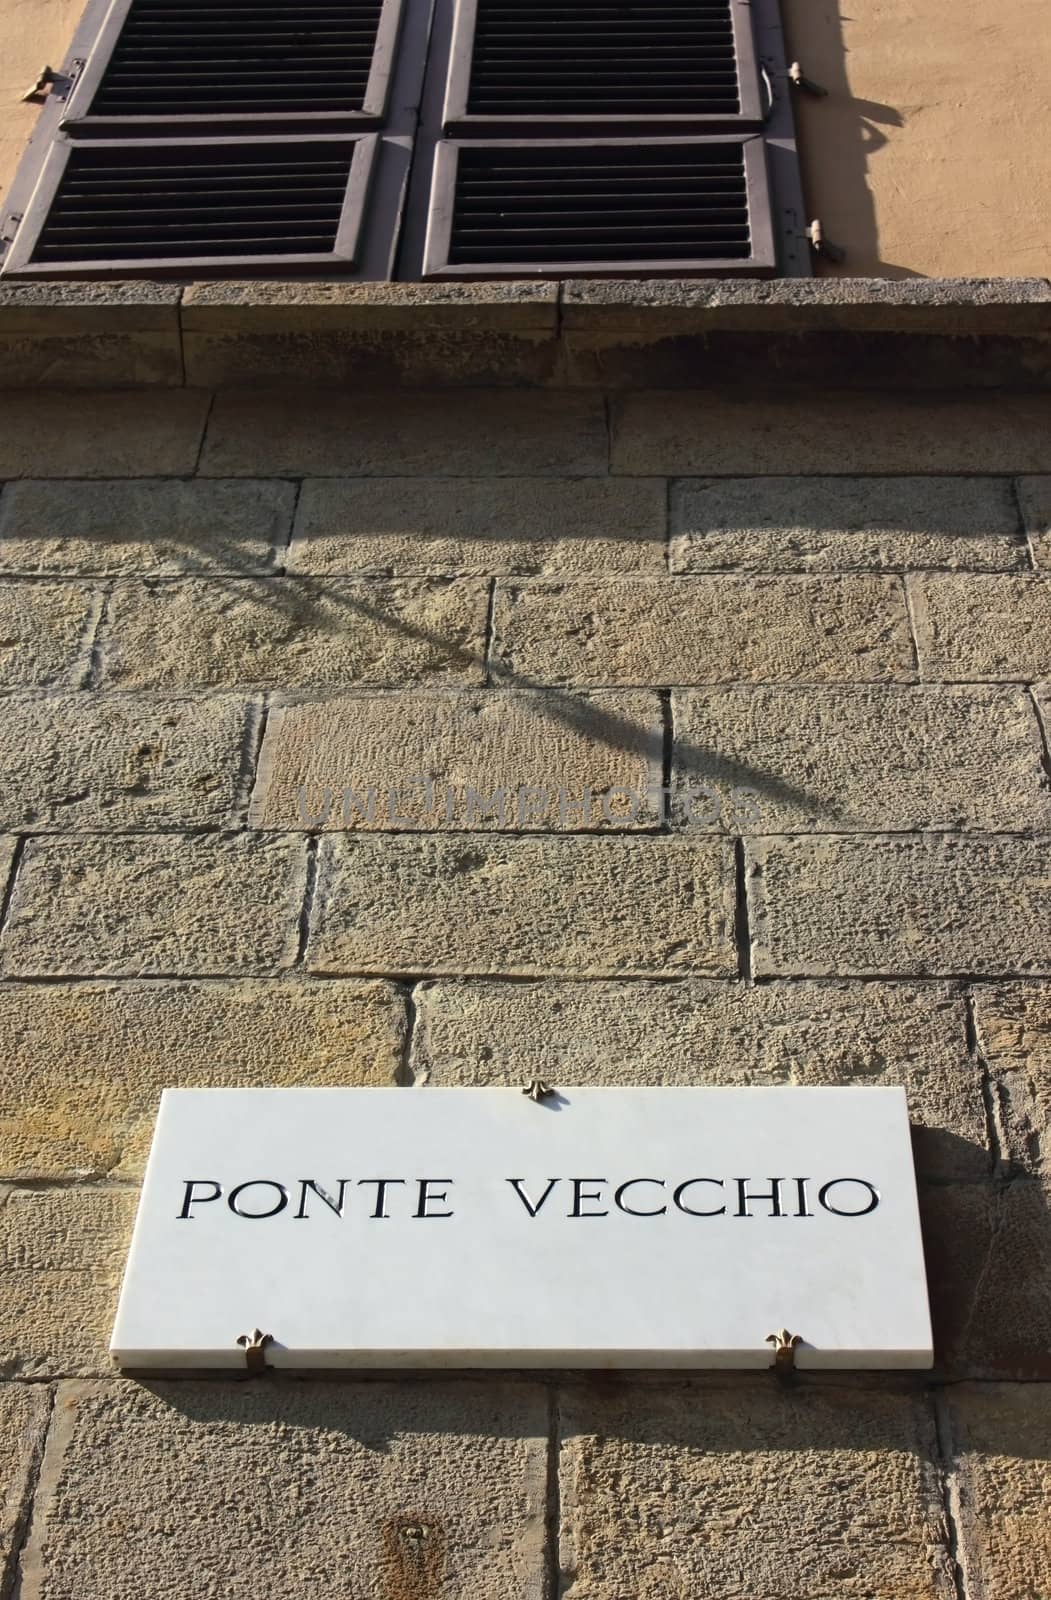 Ponte vecchio wall sign at the begging of the famous bridge in Florence.